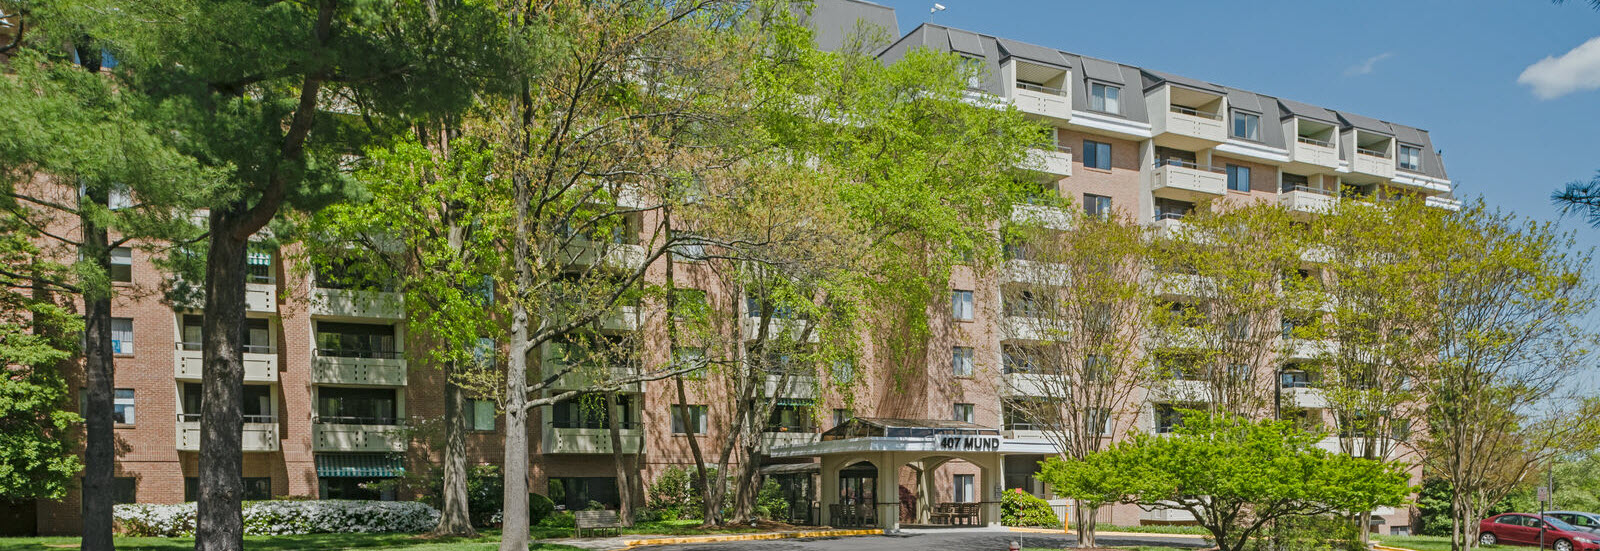 front exterior of Mund Apartments with green trees and covered entrance